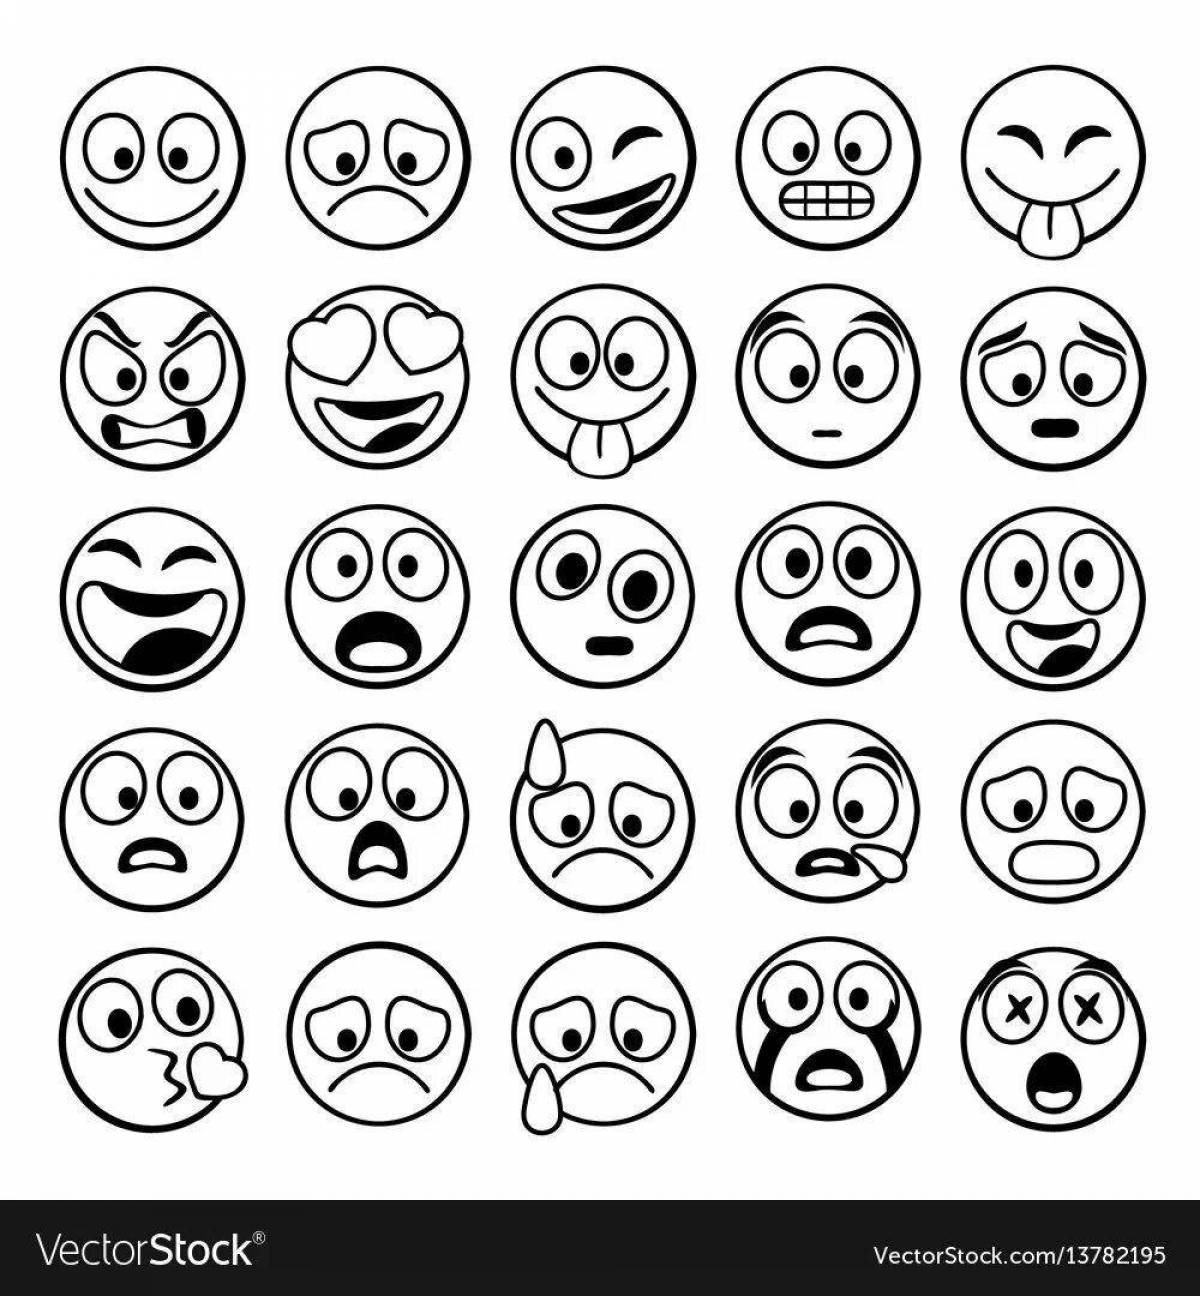 Humorous coloring pages emoticons funny